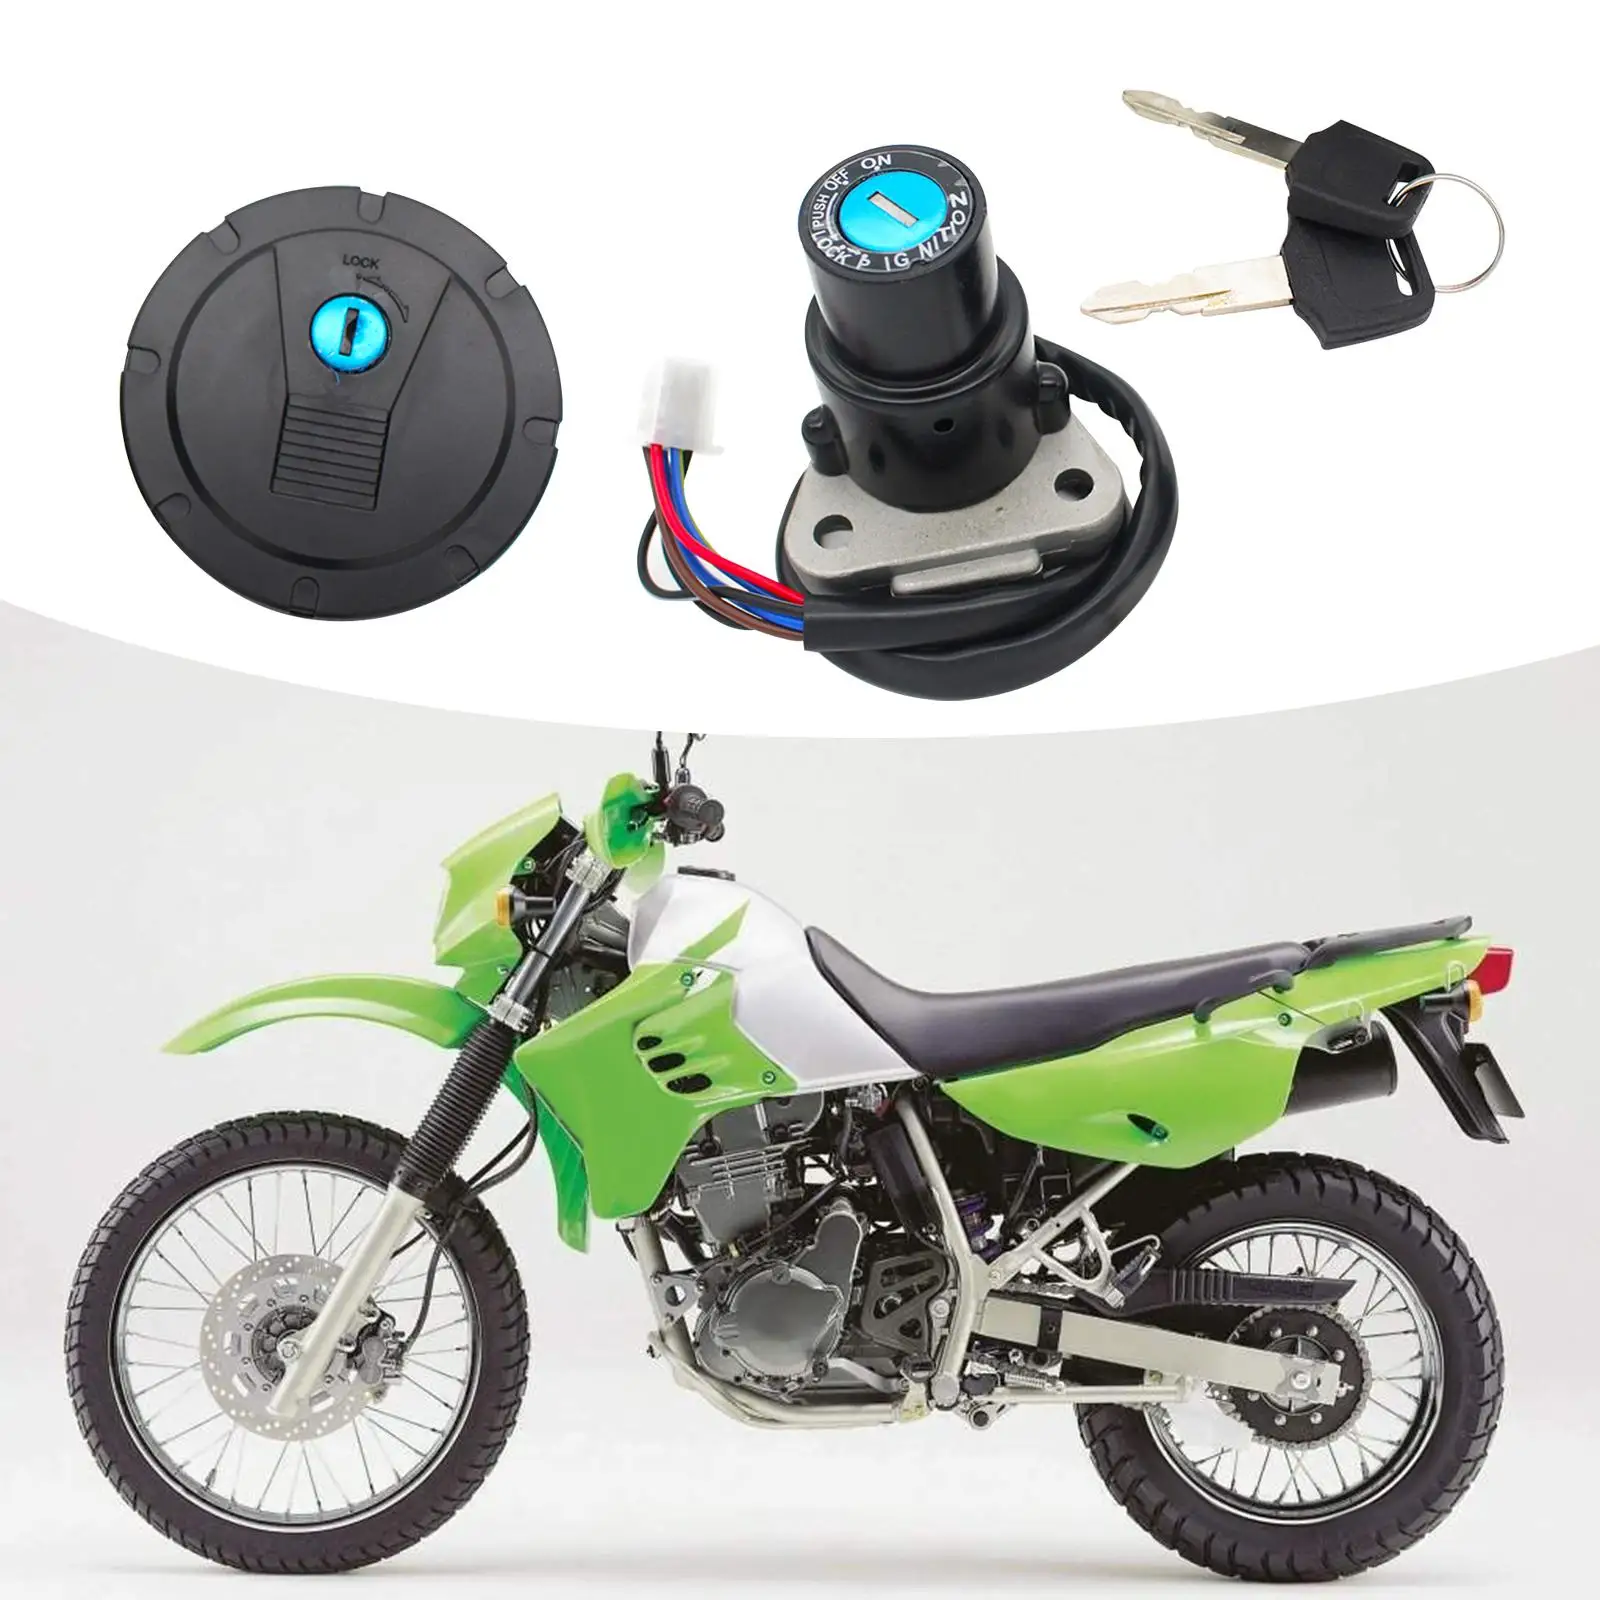 Motorcycle Ignition Switch Spare Parts High Performance with Key Barrel Lock Cylinder for Kawasaki Klr650 Klr 650 1987-2007